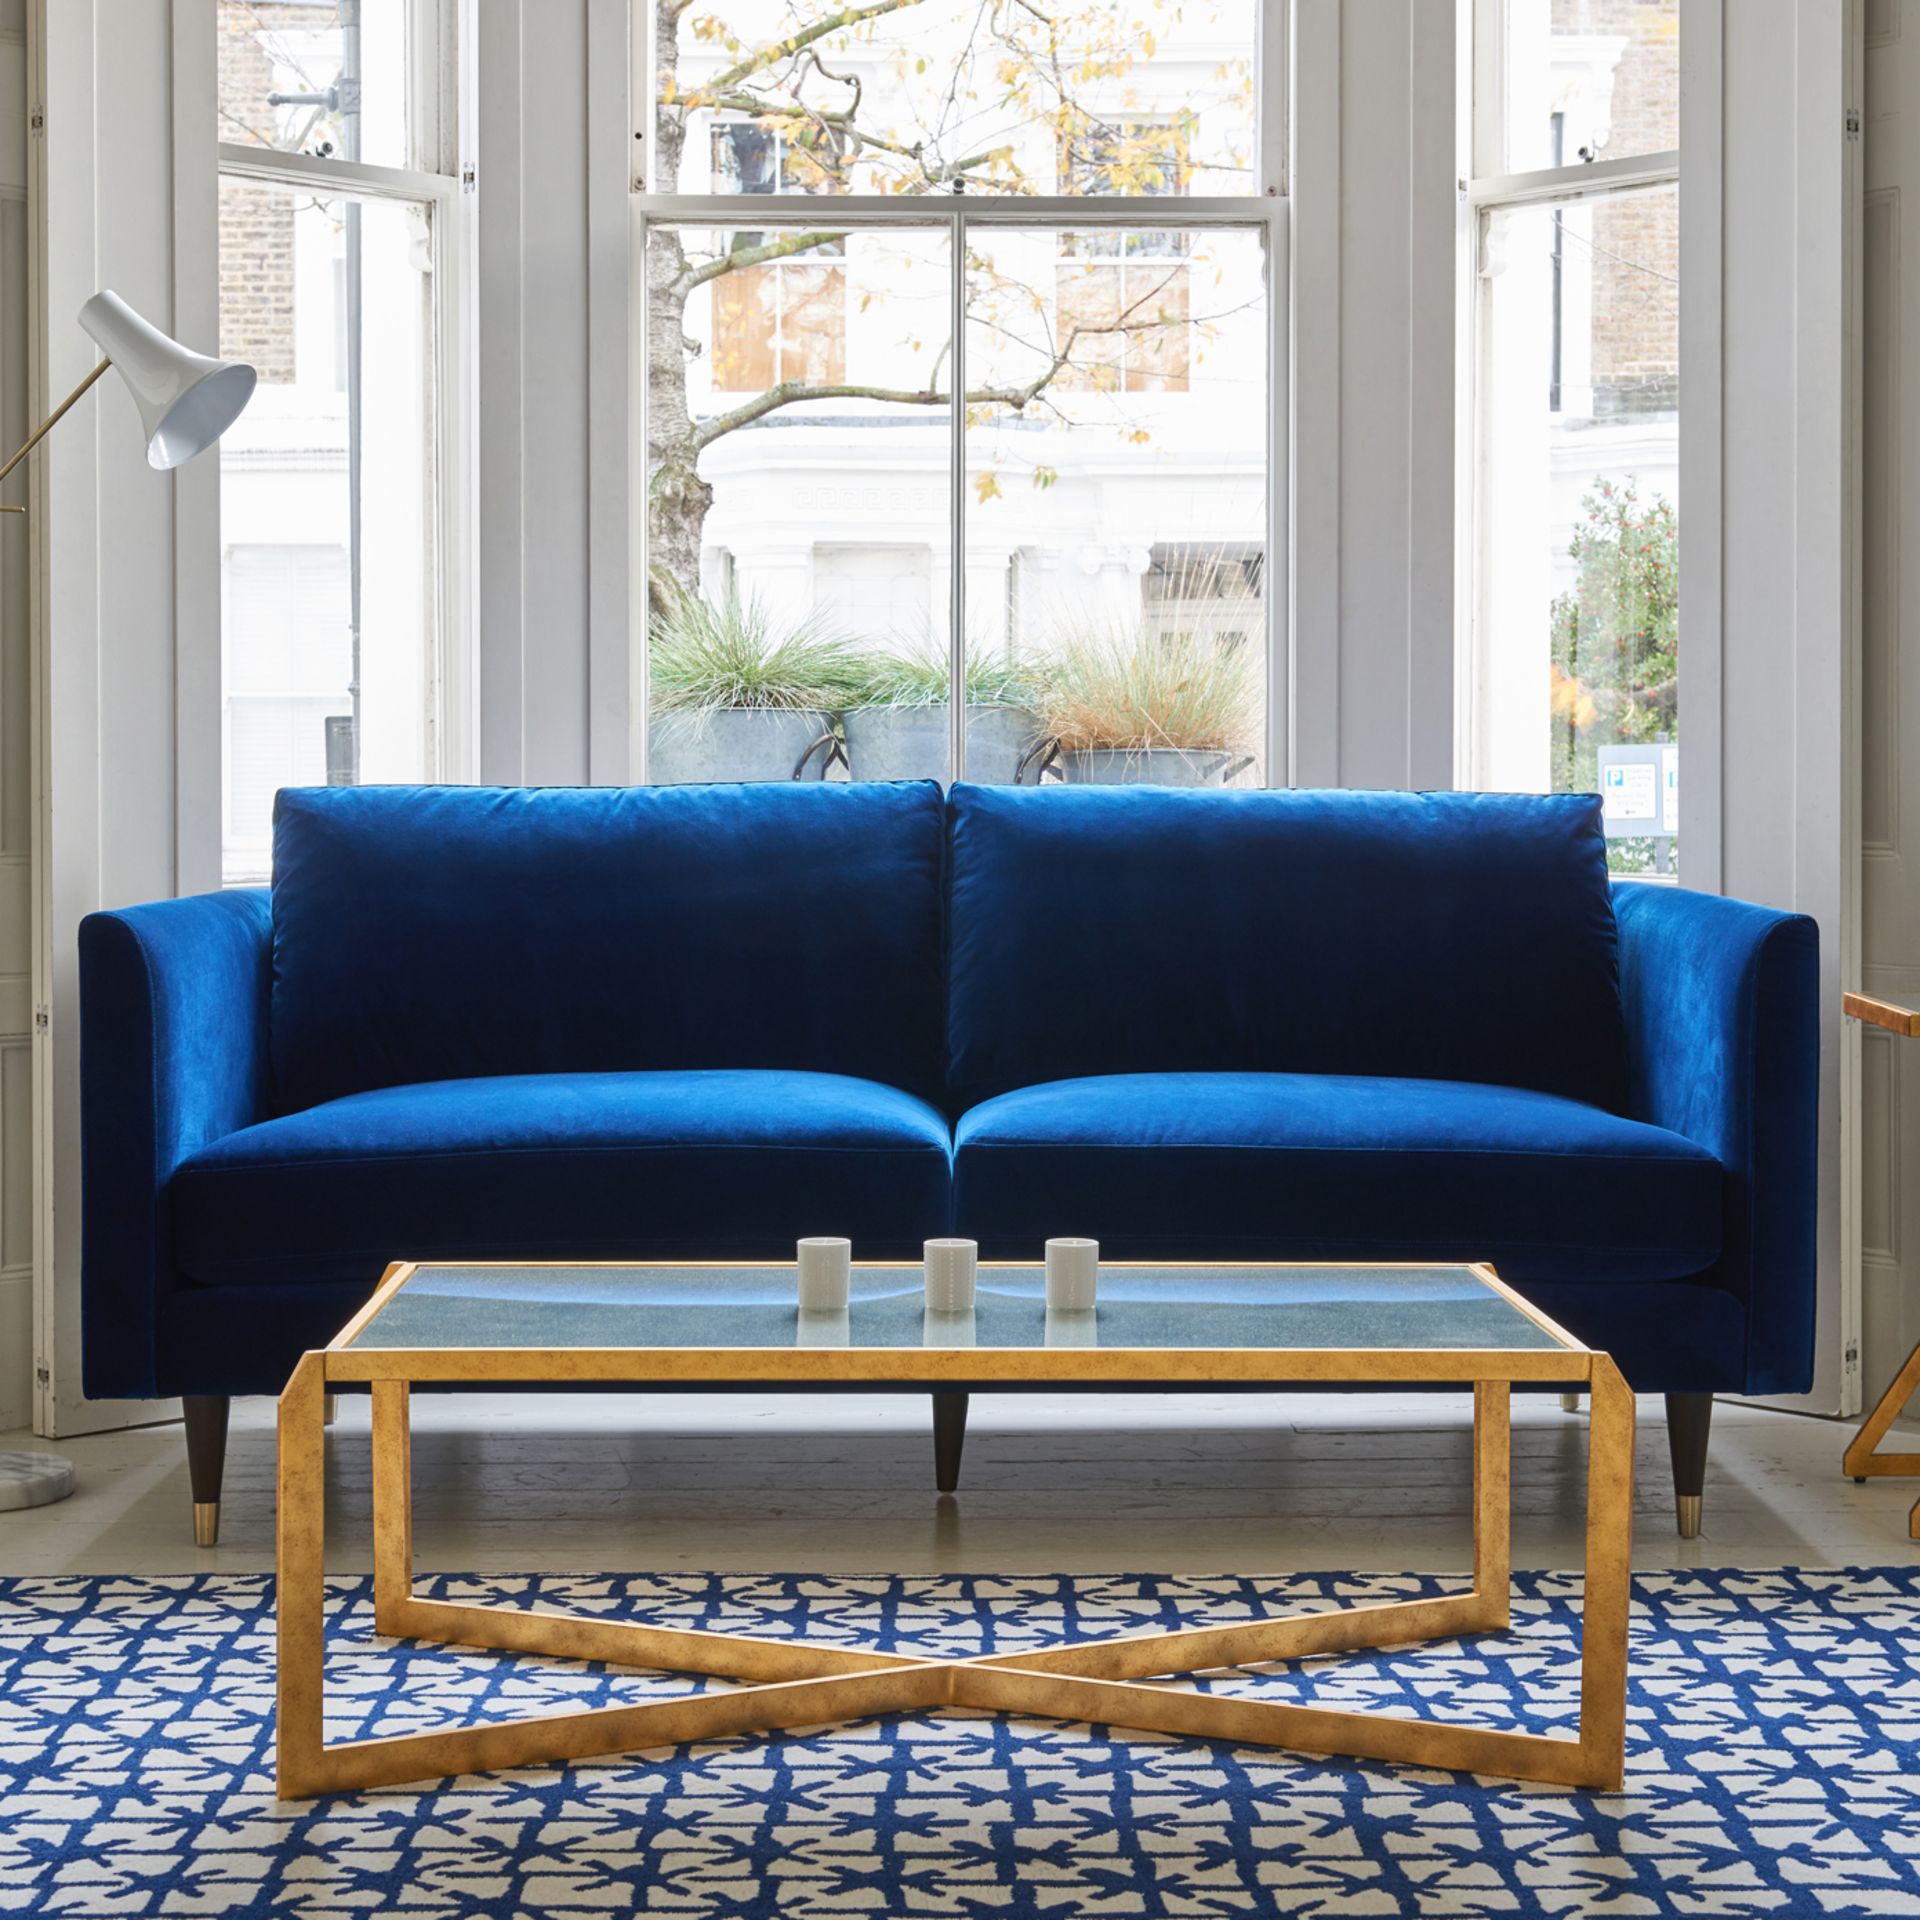 Henry 2 Seater Velvet Sofa - Navy Blue Henry By Christiane Lemieux Is A Contemporary Sofa With - Image 3 of 4